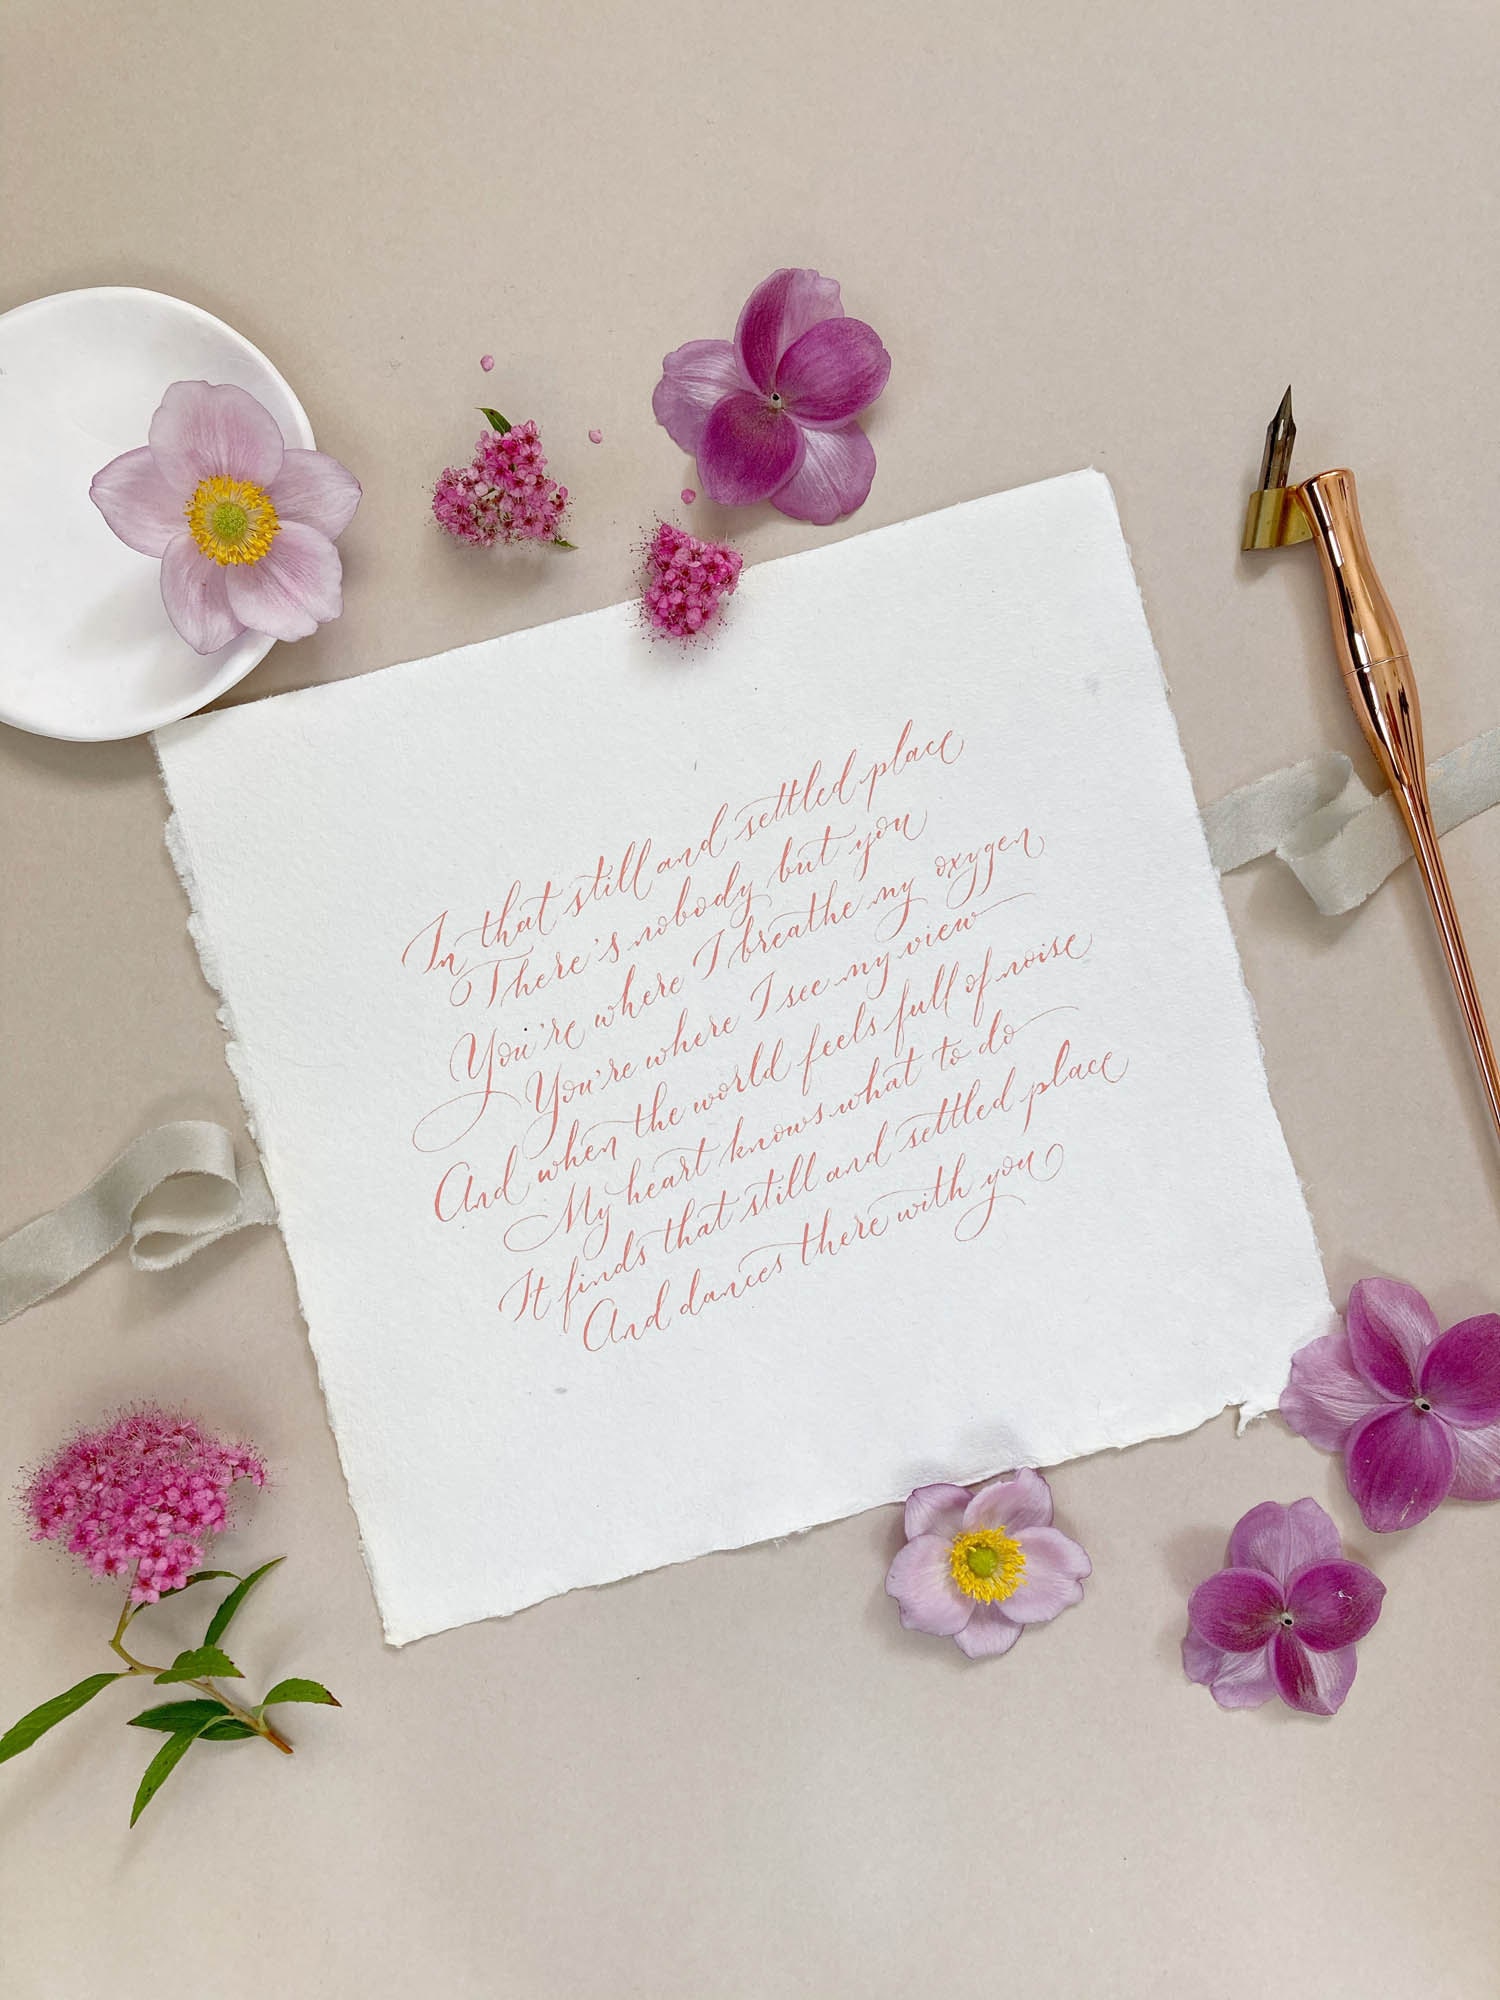 Wedding reading poem in calligraphy gift